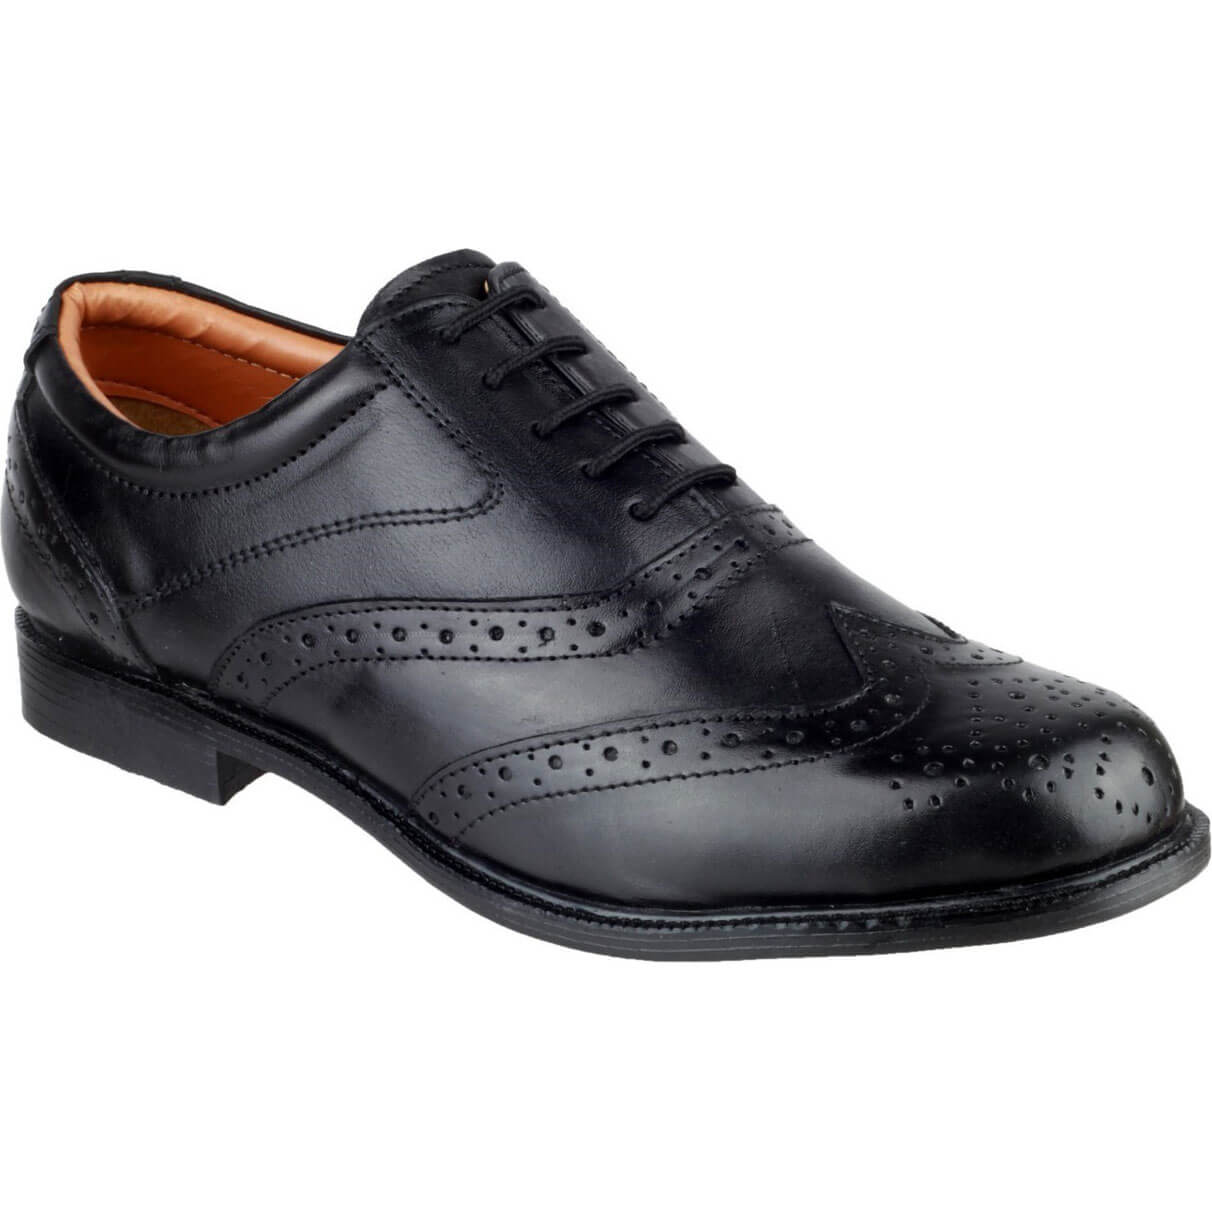 Image of Amblers Liverpool Oxford Brogue Black Size 12